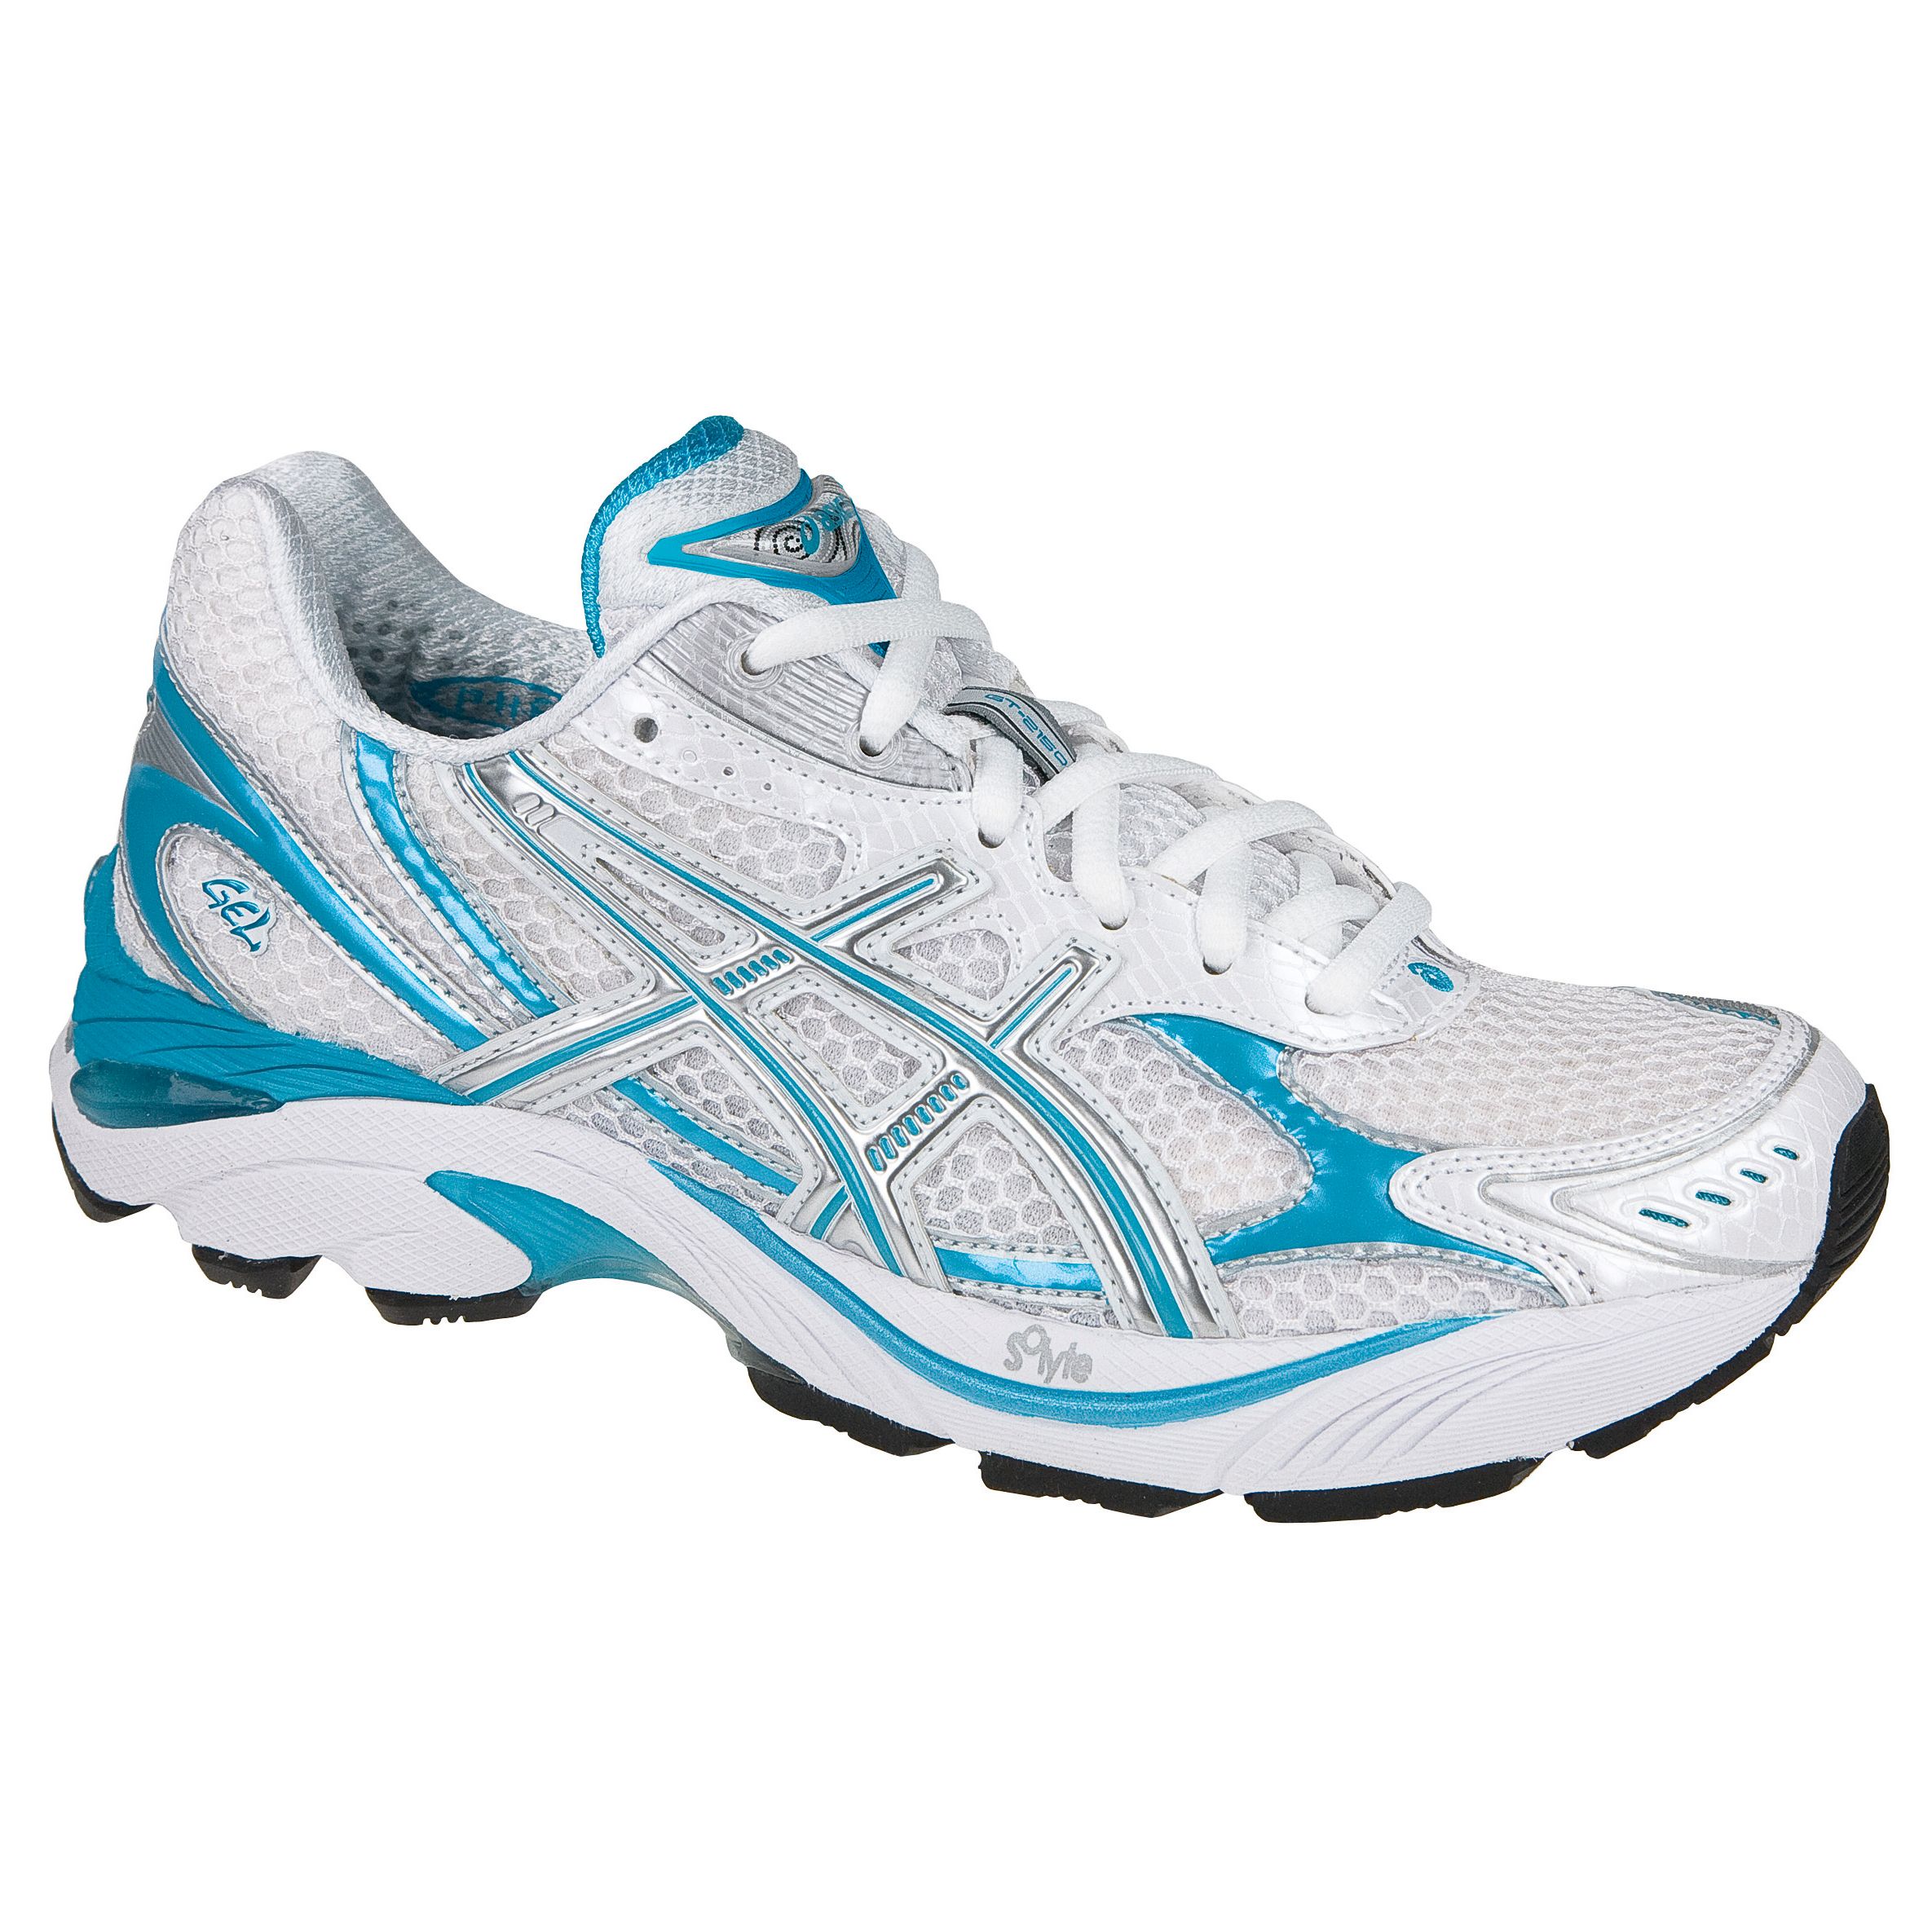 Asics GT2150 Running Shoes, White/Blue - review, compare prices, buy online